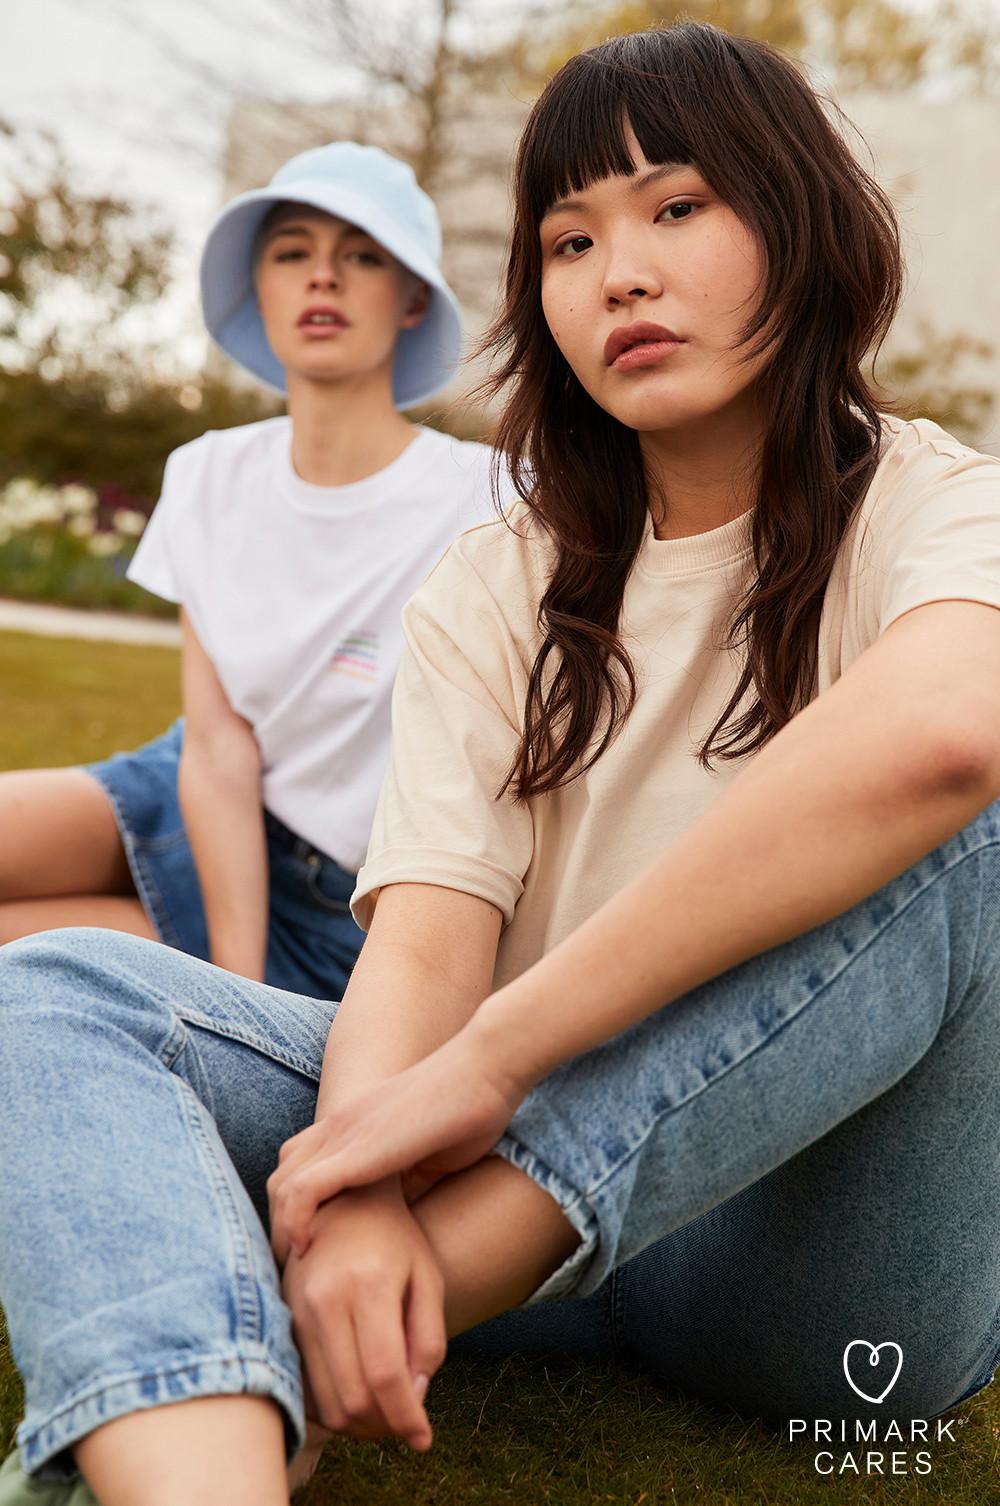 Models wearing summer t-shirts and denim jeans